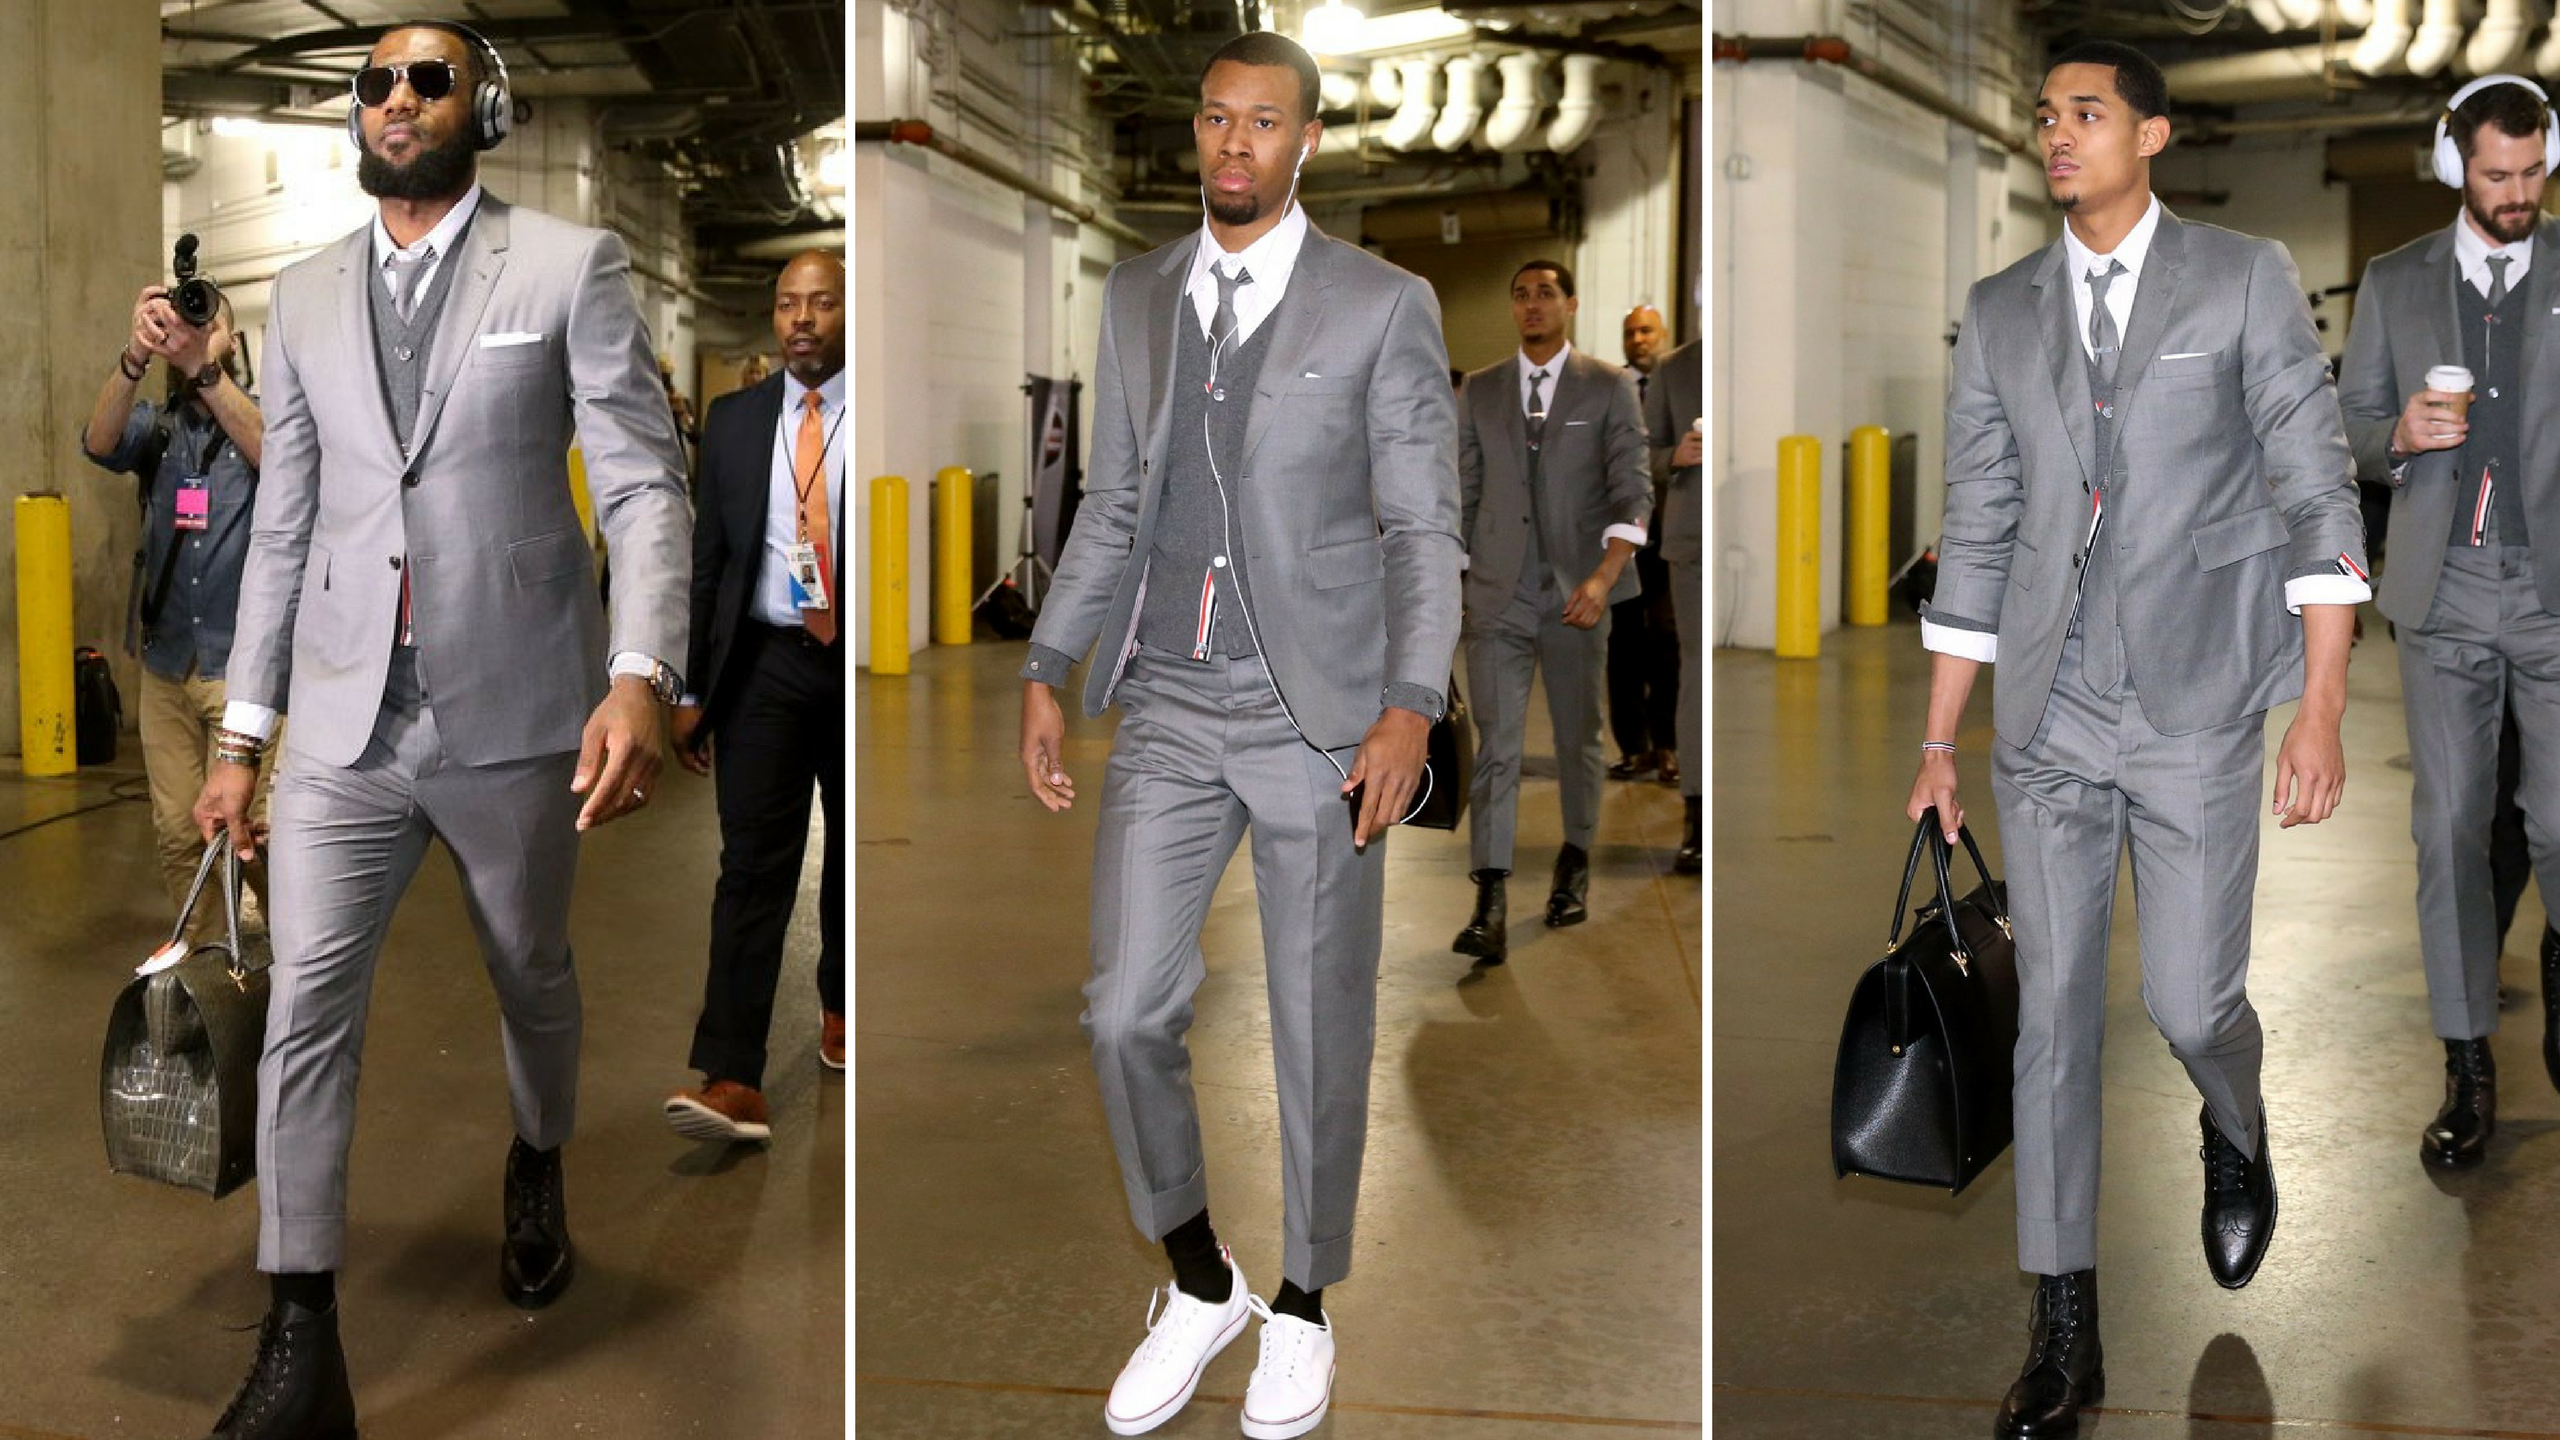 lebron james and cavaliers teammates in thom browne suits